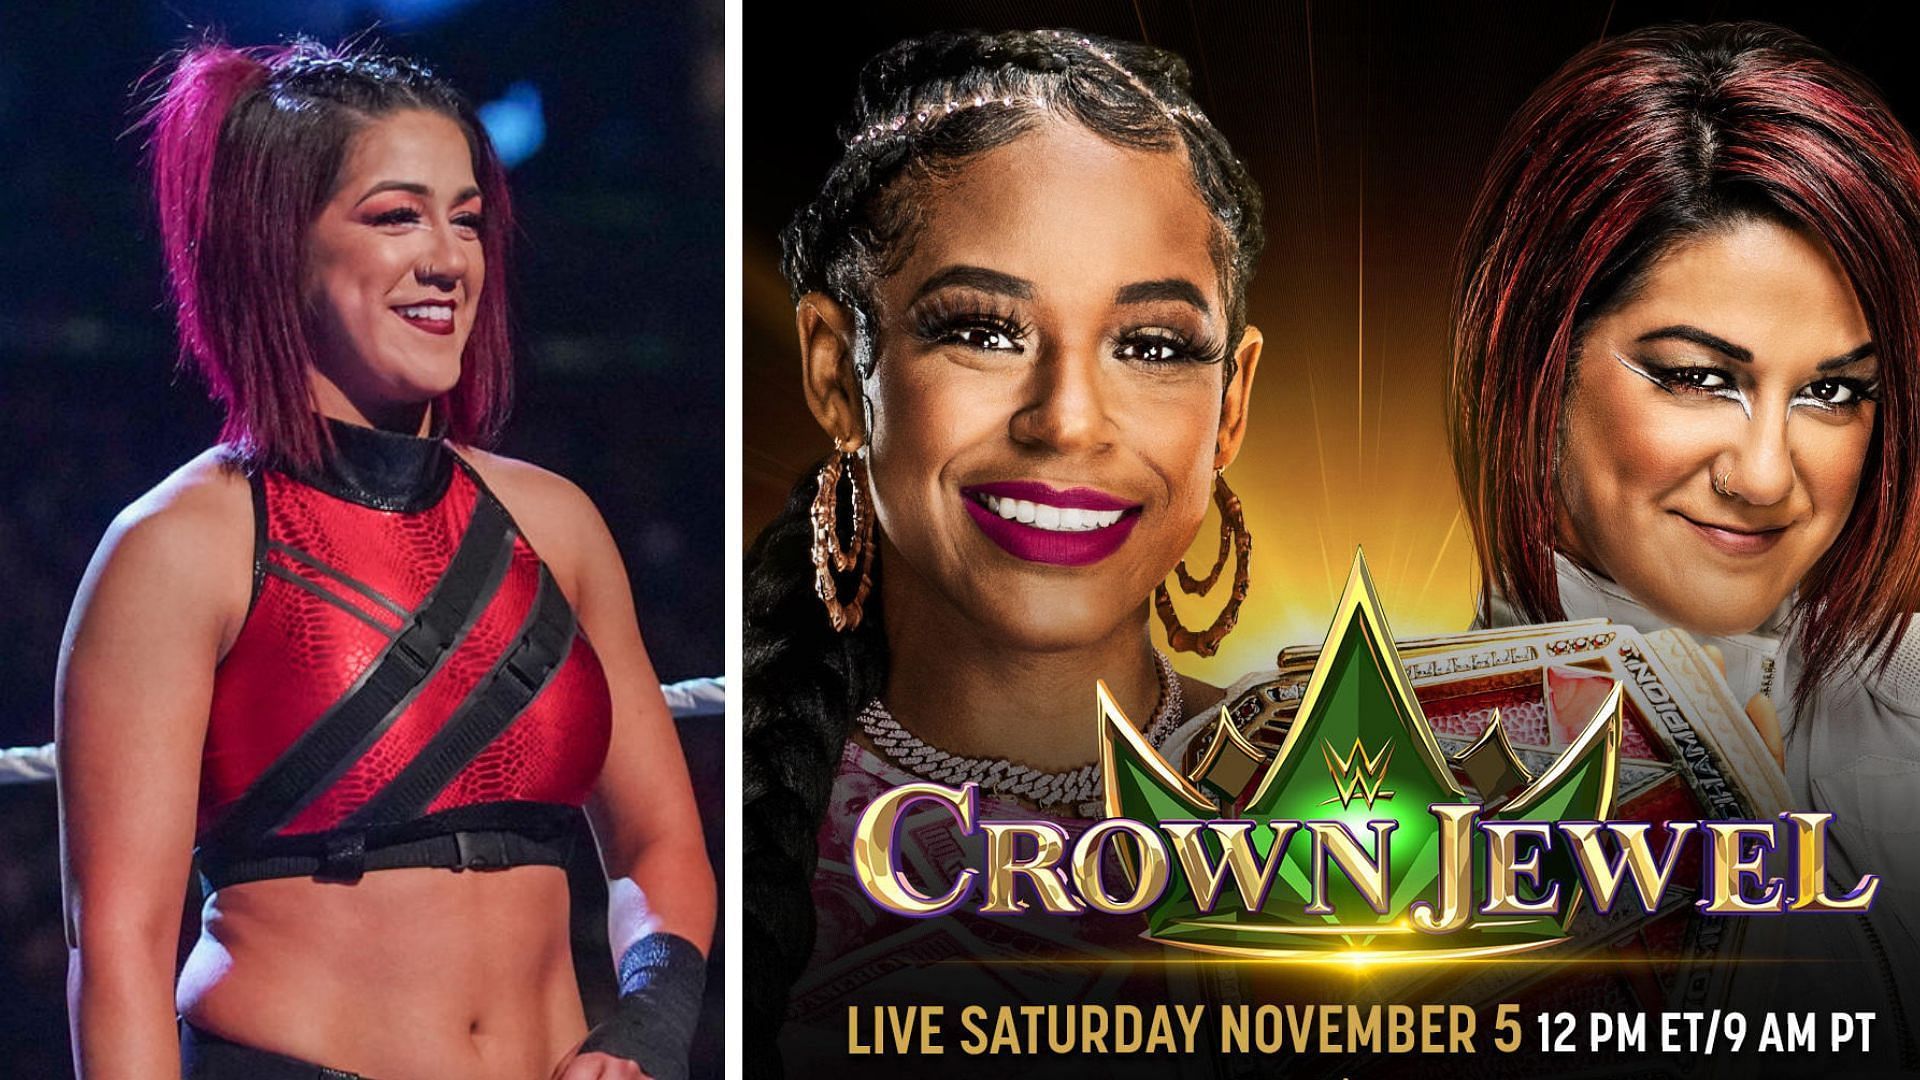 Bayley will challenge Bianca Belair for the RAW Women